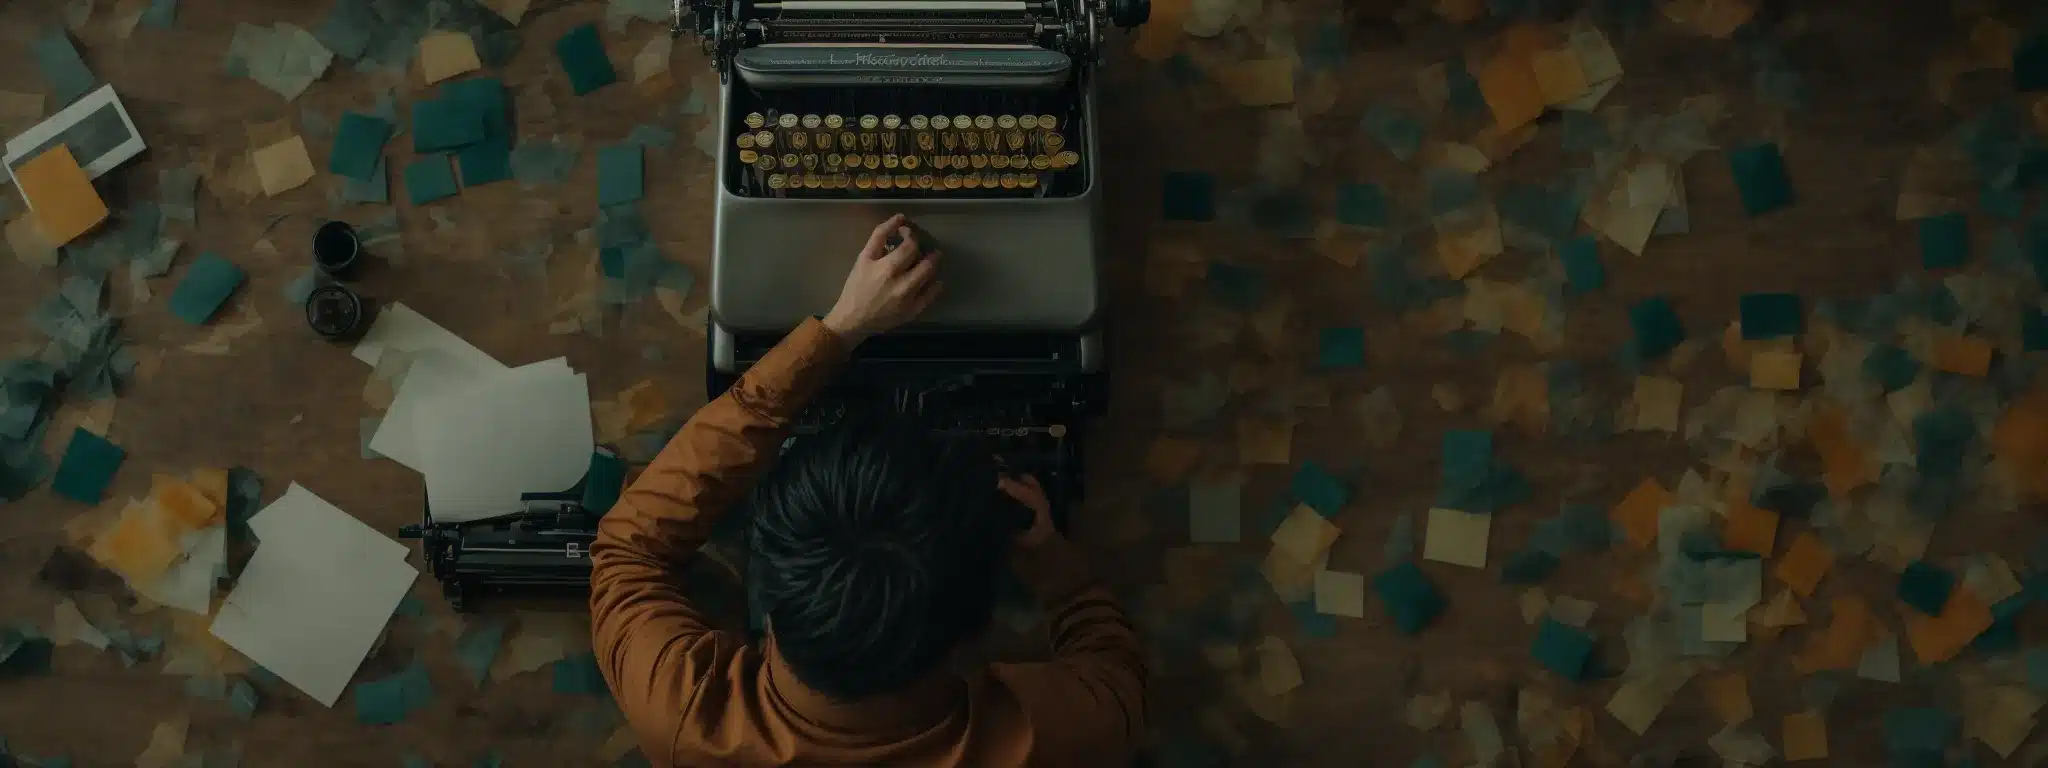 A Person Typing On An Old-Fashioned Typewriter Amidst Symbols And Shapes That Evoke Creativity And Branding.